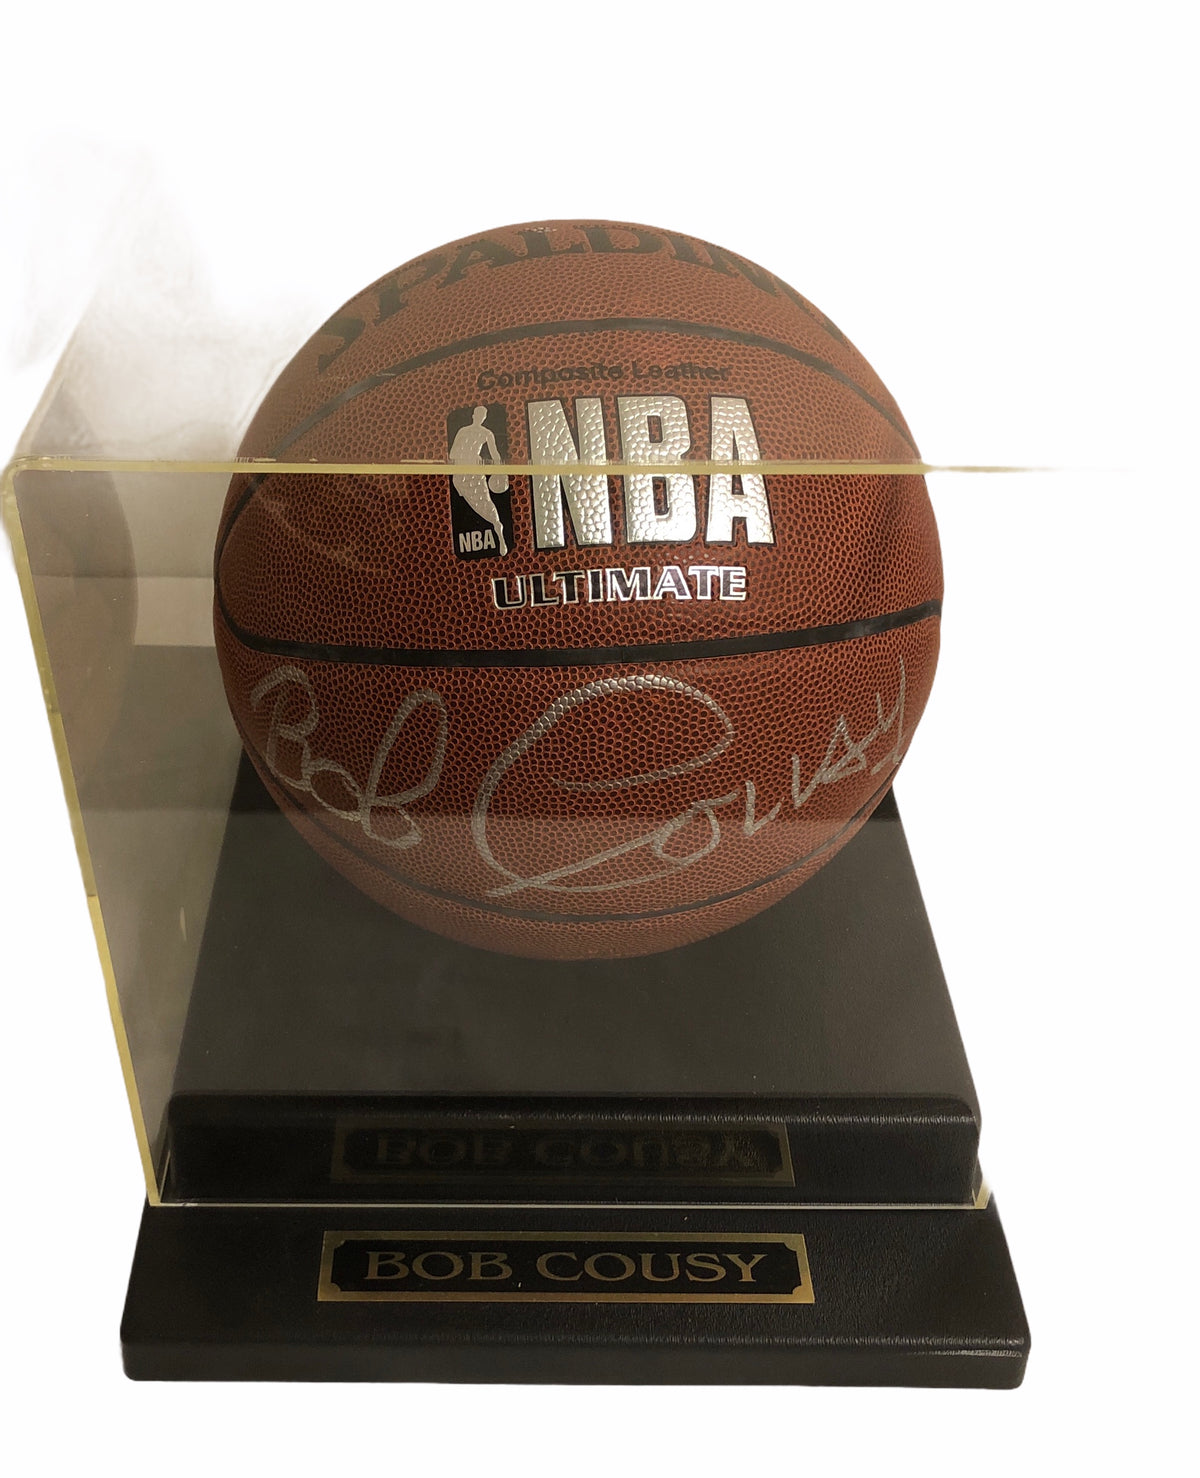 Signed Basketball by Bob Cousy